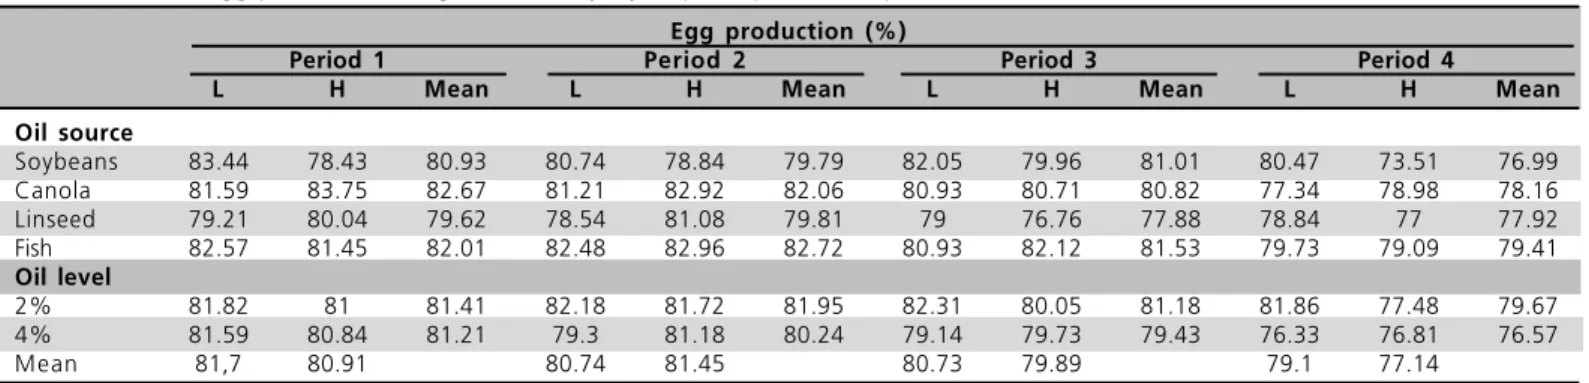 Table 2  - Mean egg production of light and heavy layers per experimental period as a function of oil source and level.